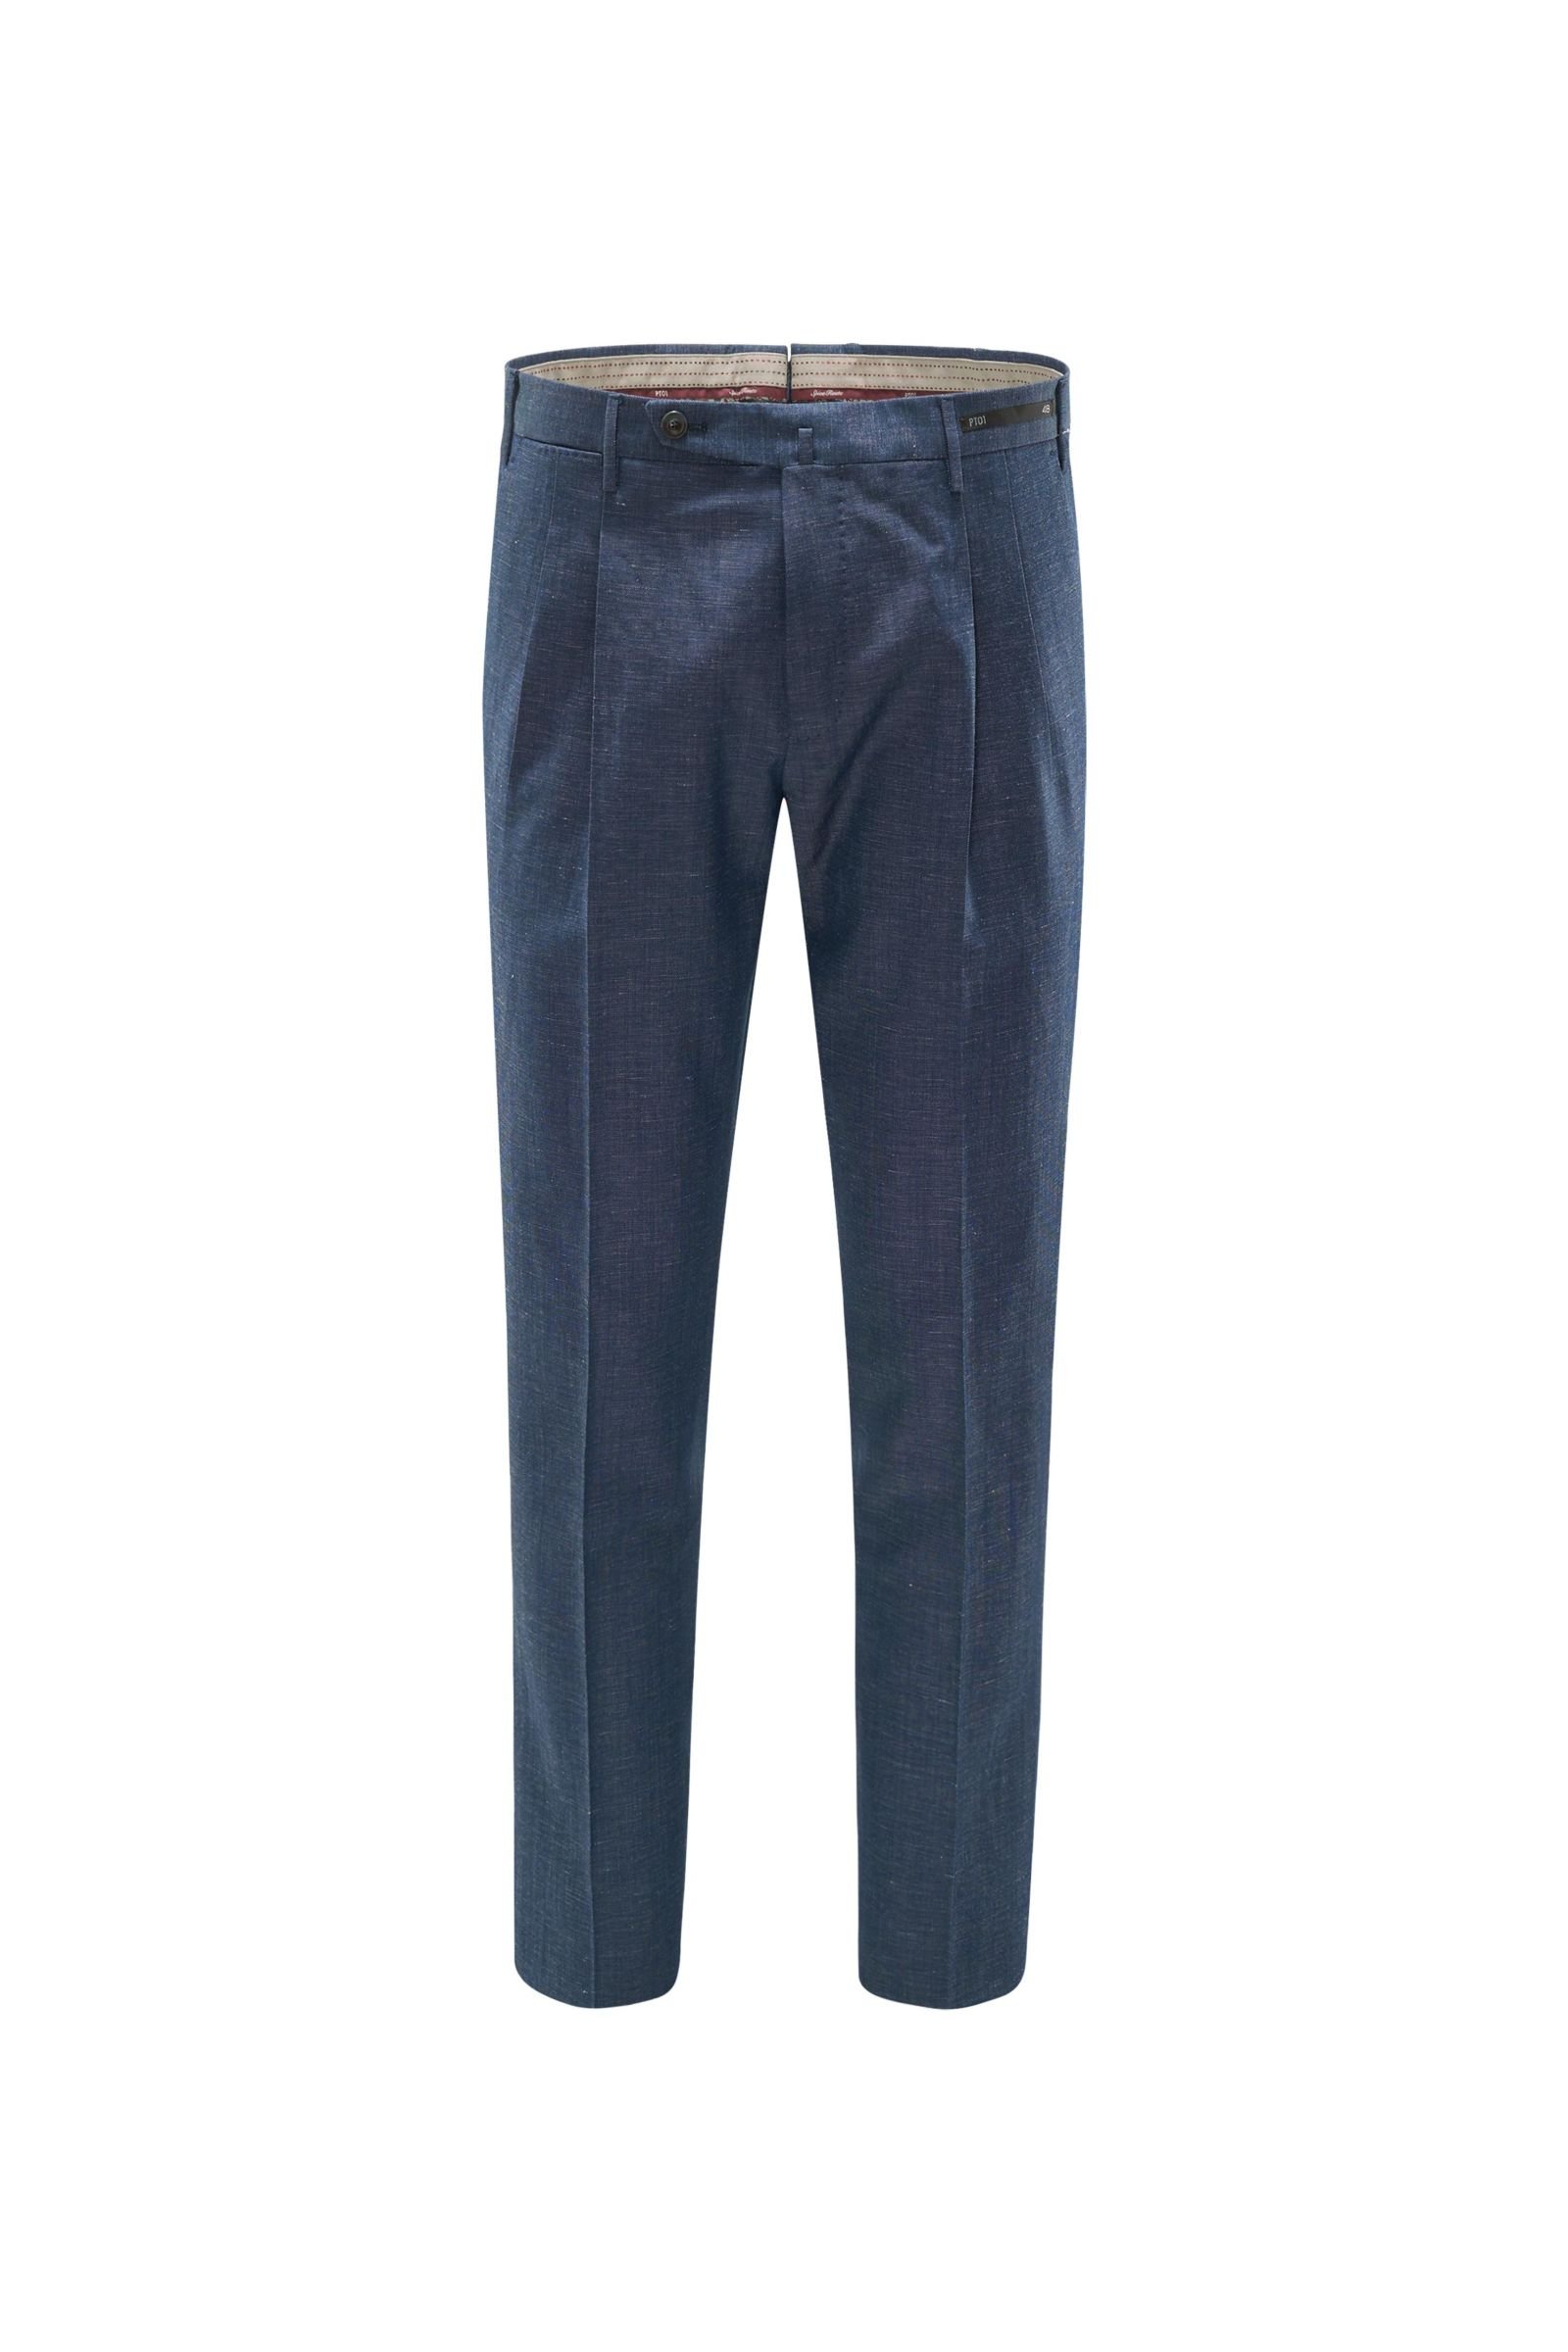 Chambray trousers 'Spice Route Preppy Fit' blue